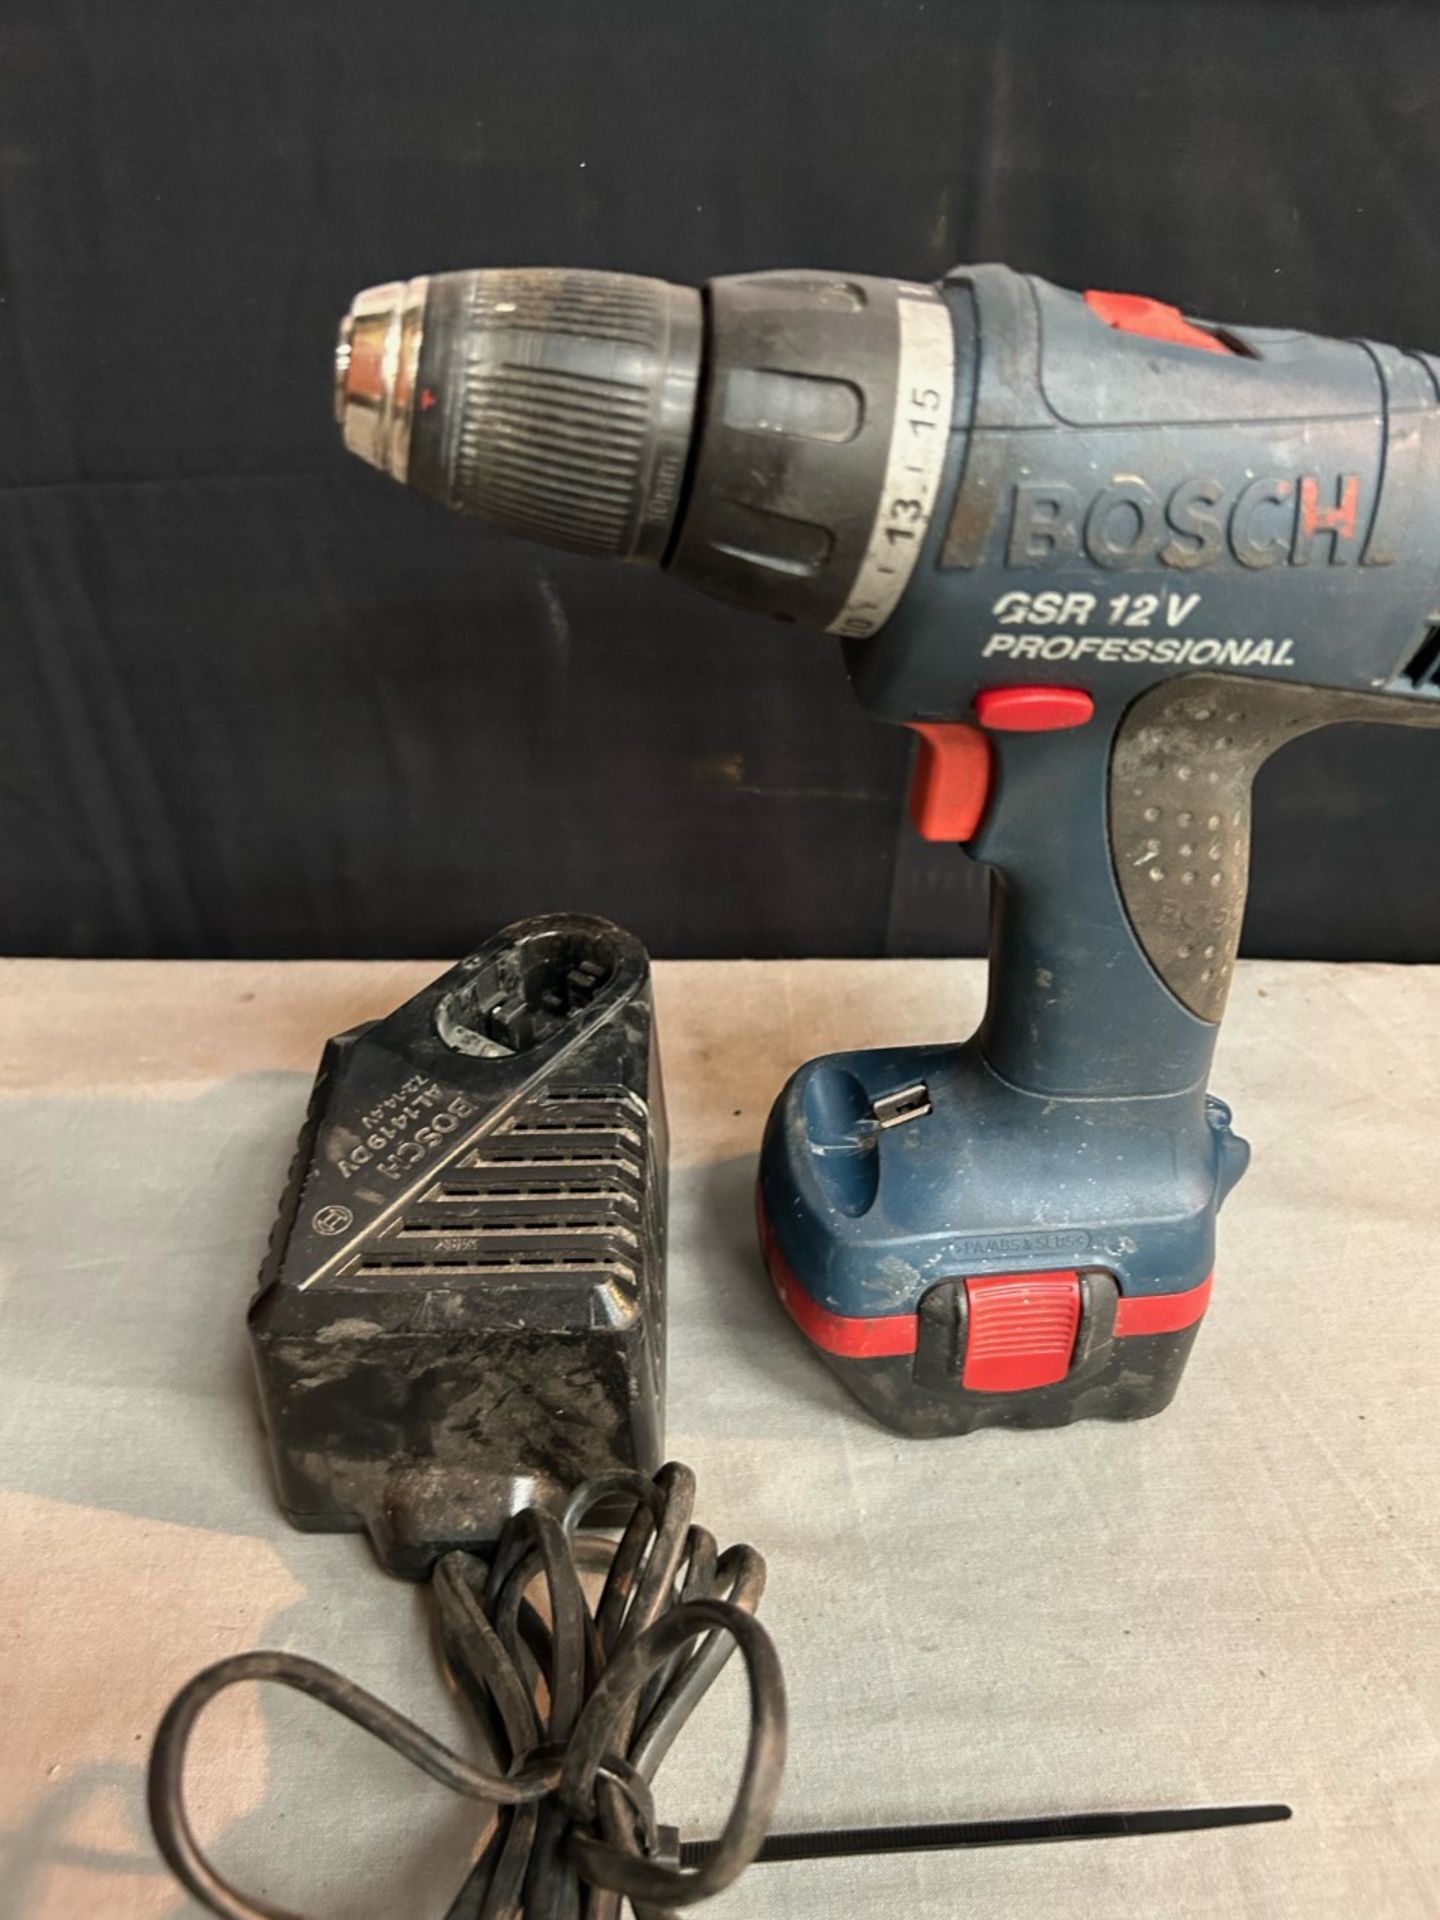 Bosch 12v power drill with battery and charger. Good condition, full working order as seen in video - Image 2 of 2